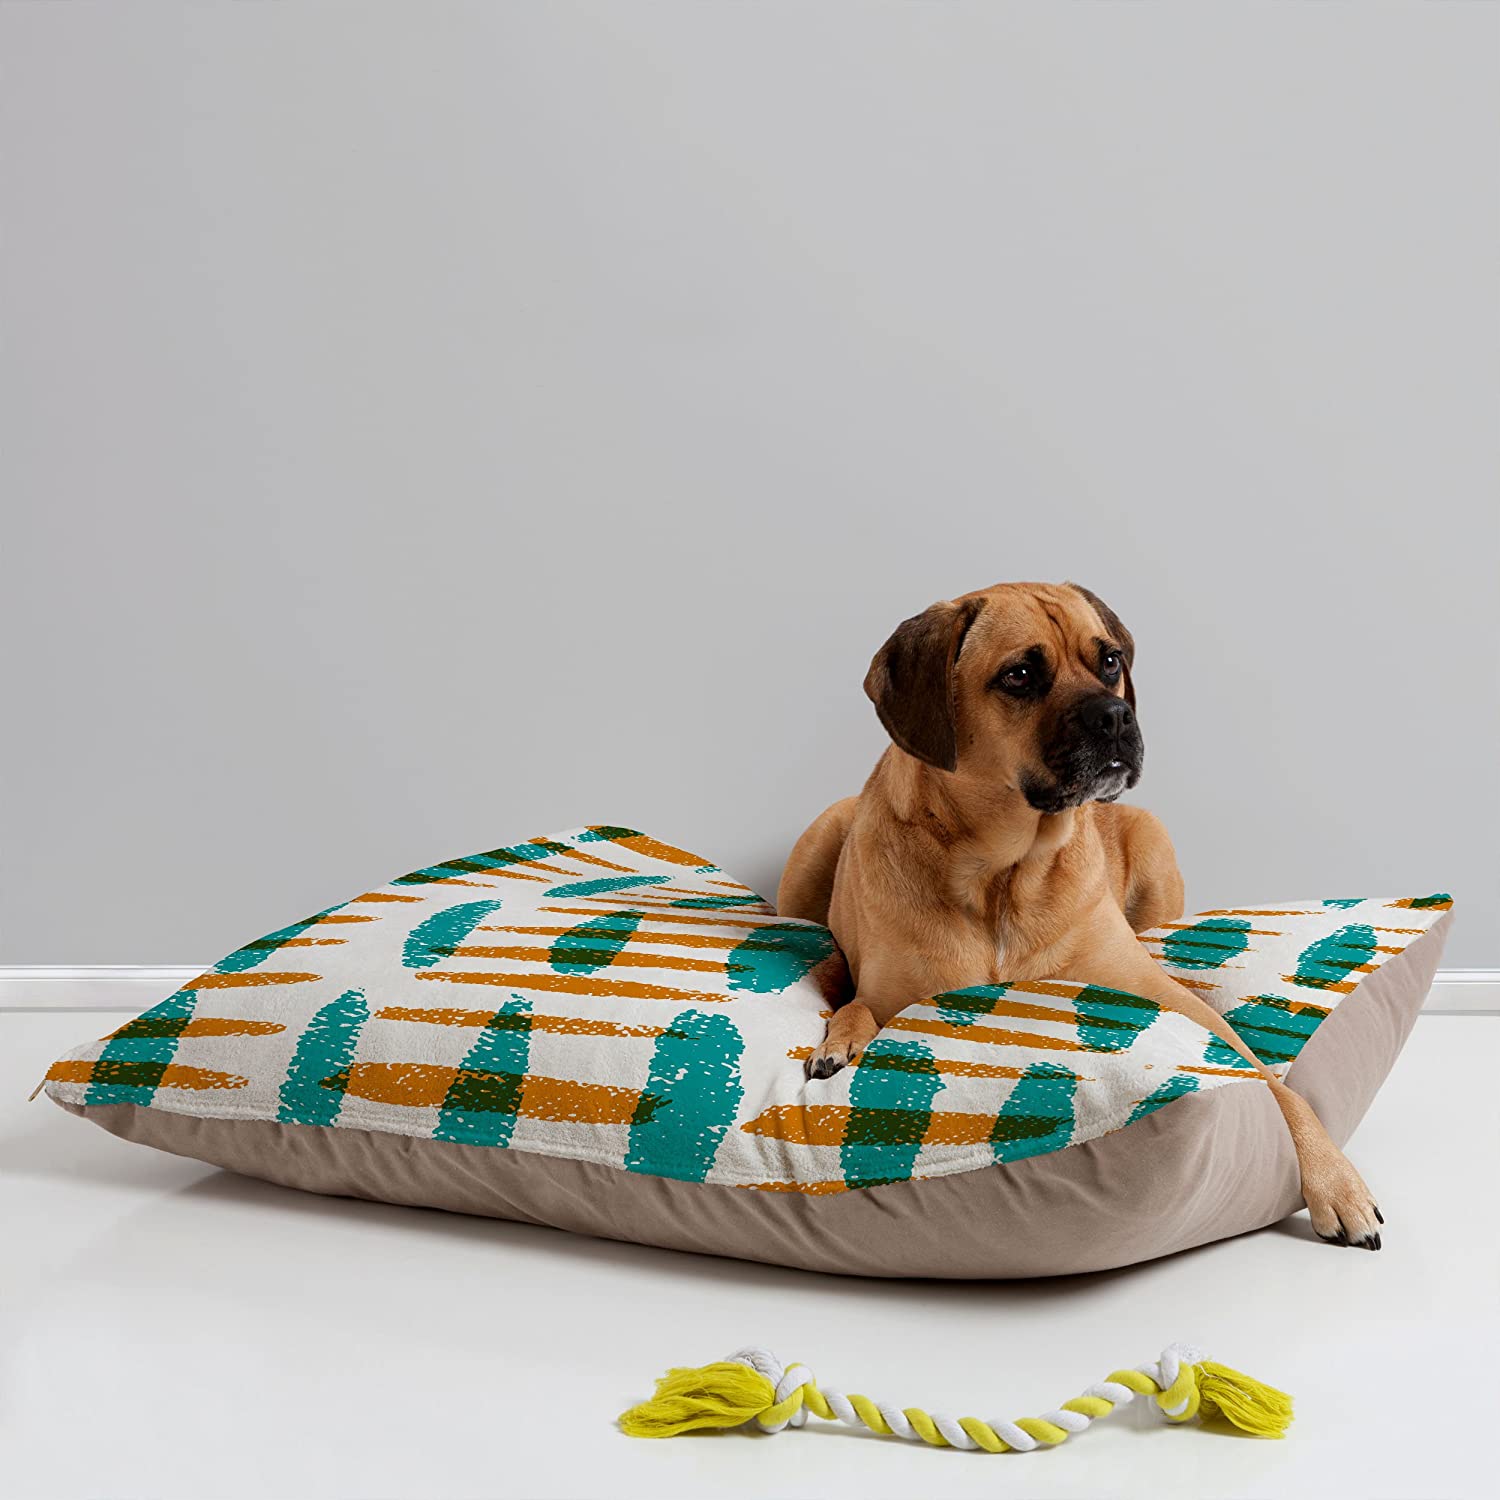 Doggie pillow 1 +80 Adorable Dog Bed Designs That Will Surprise You - 16